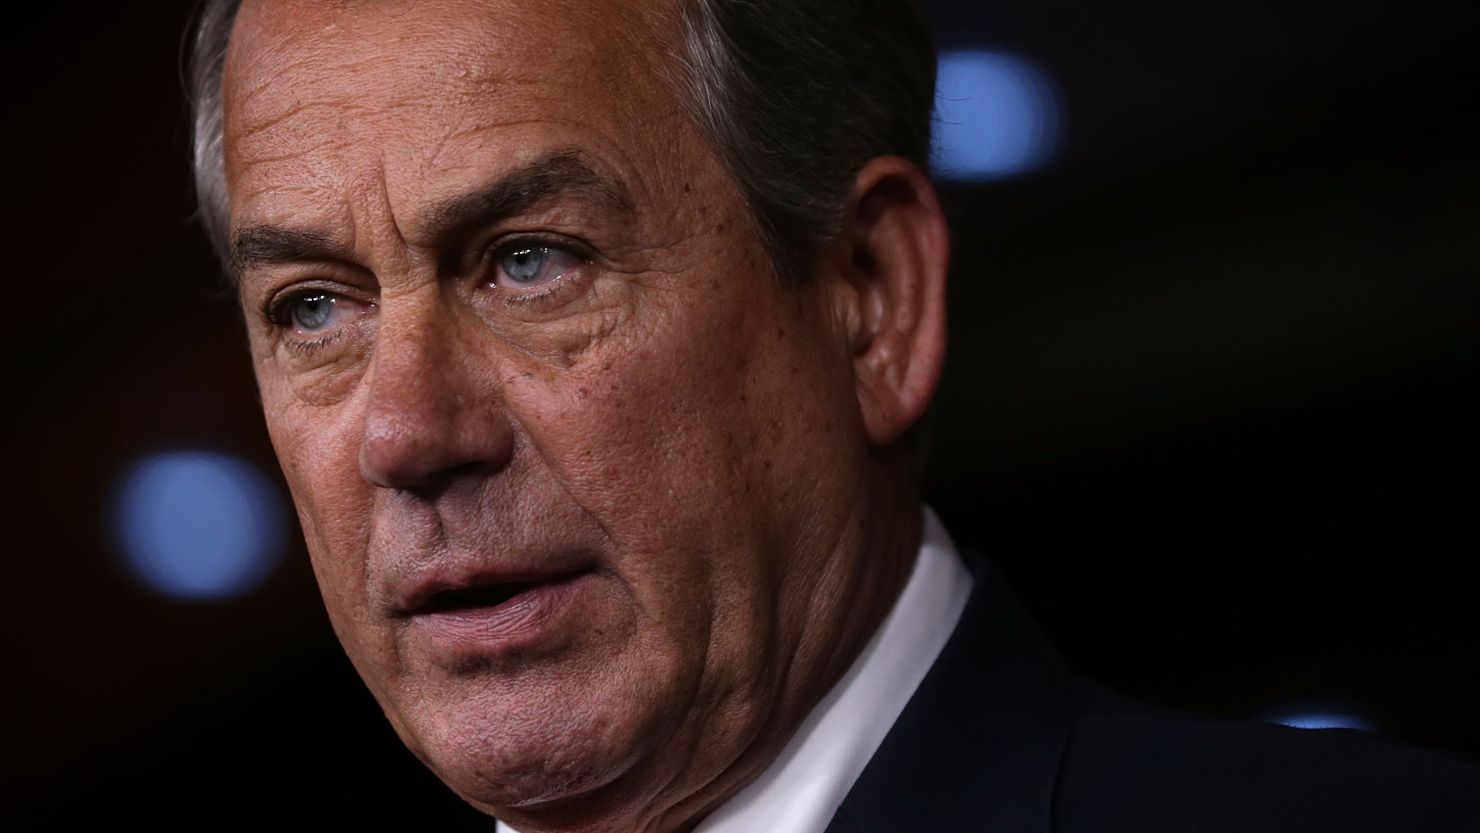 U.S. Speaker of the House Rep. John Boehner (R-OH) speaks to members of the media during his weekly news conference July 16, 2015 on Capitol Hill in Washington, D.C.